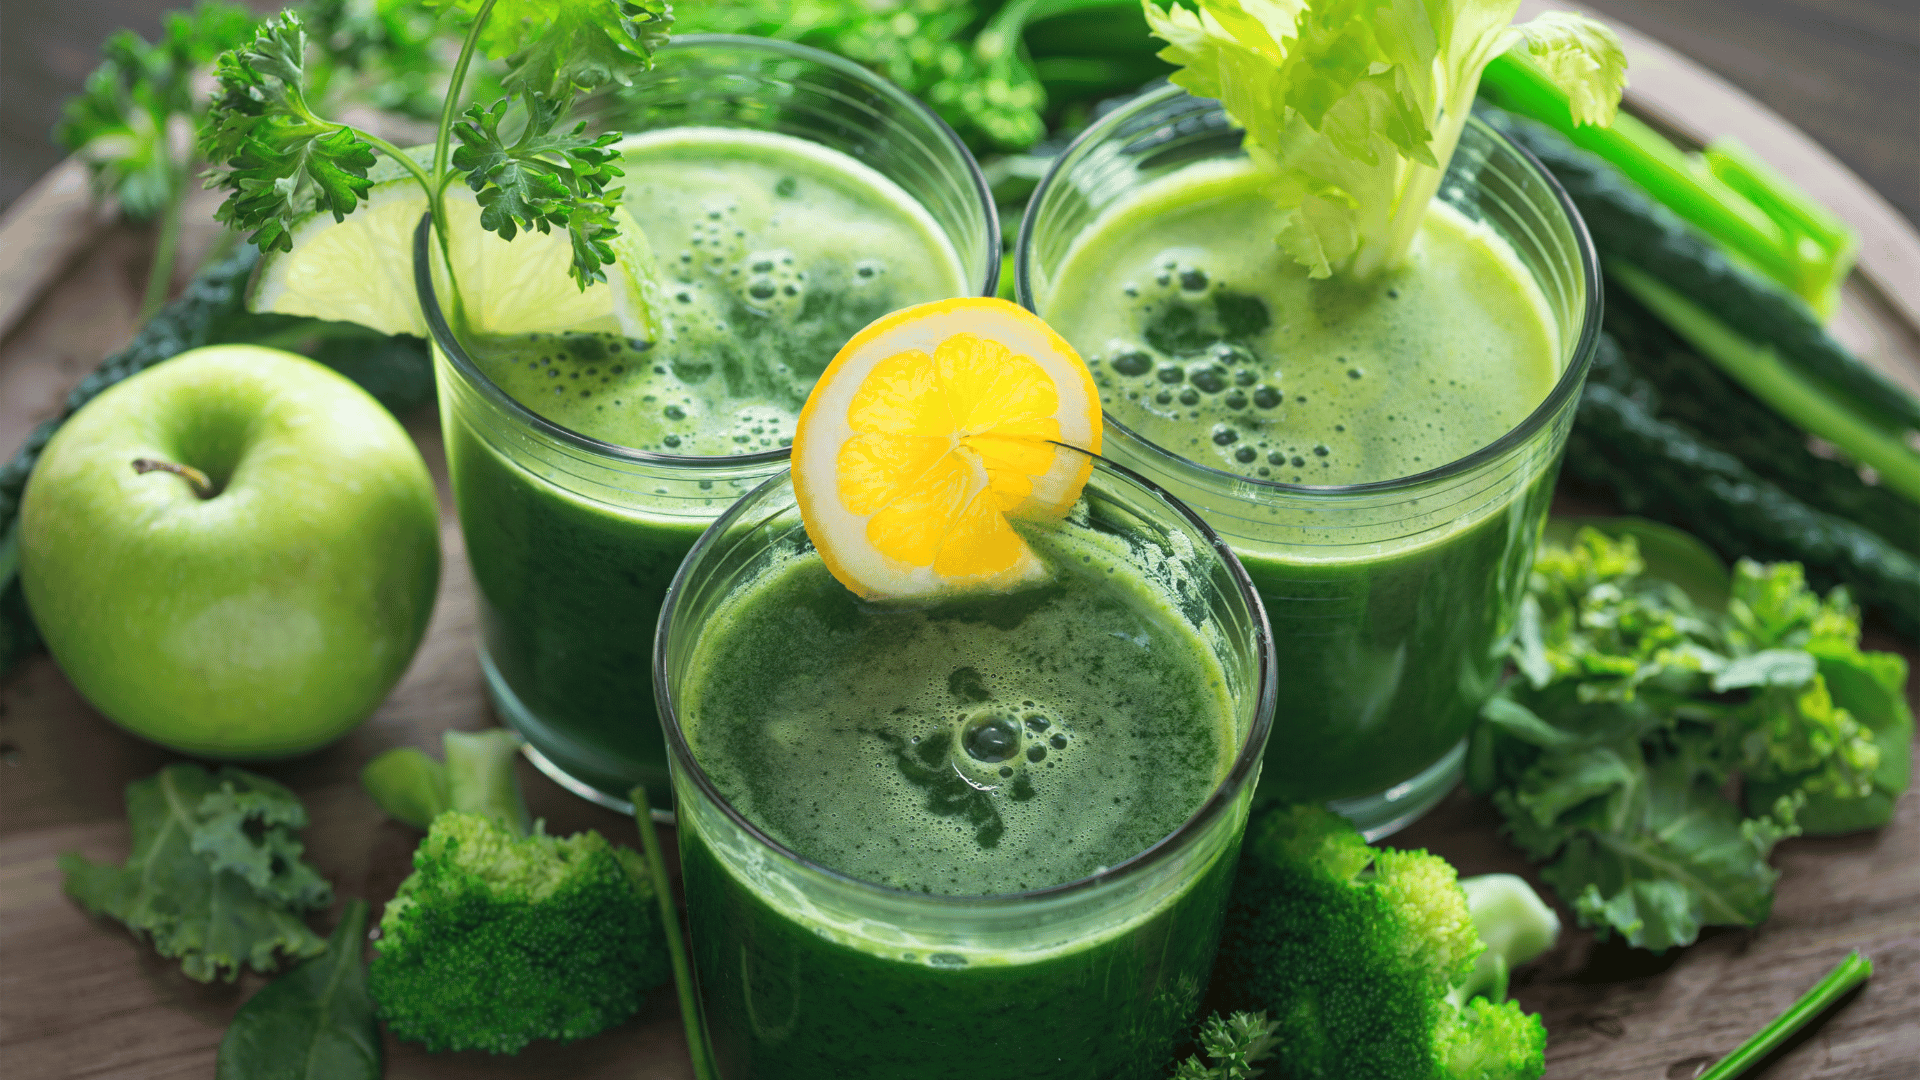 when is the best time to drink green juice?